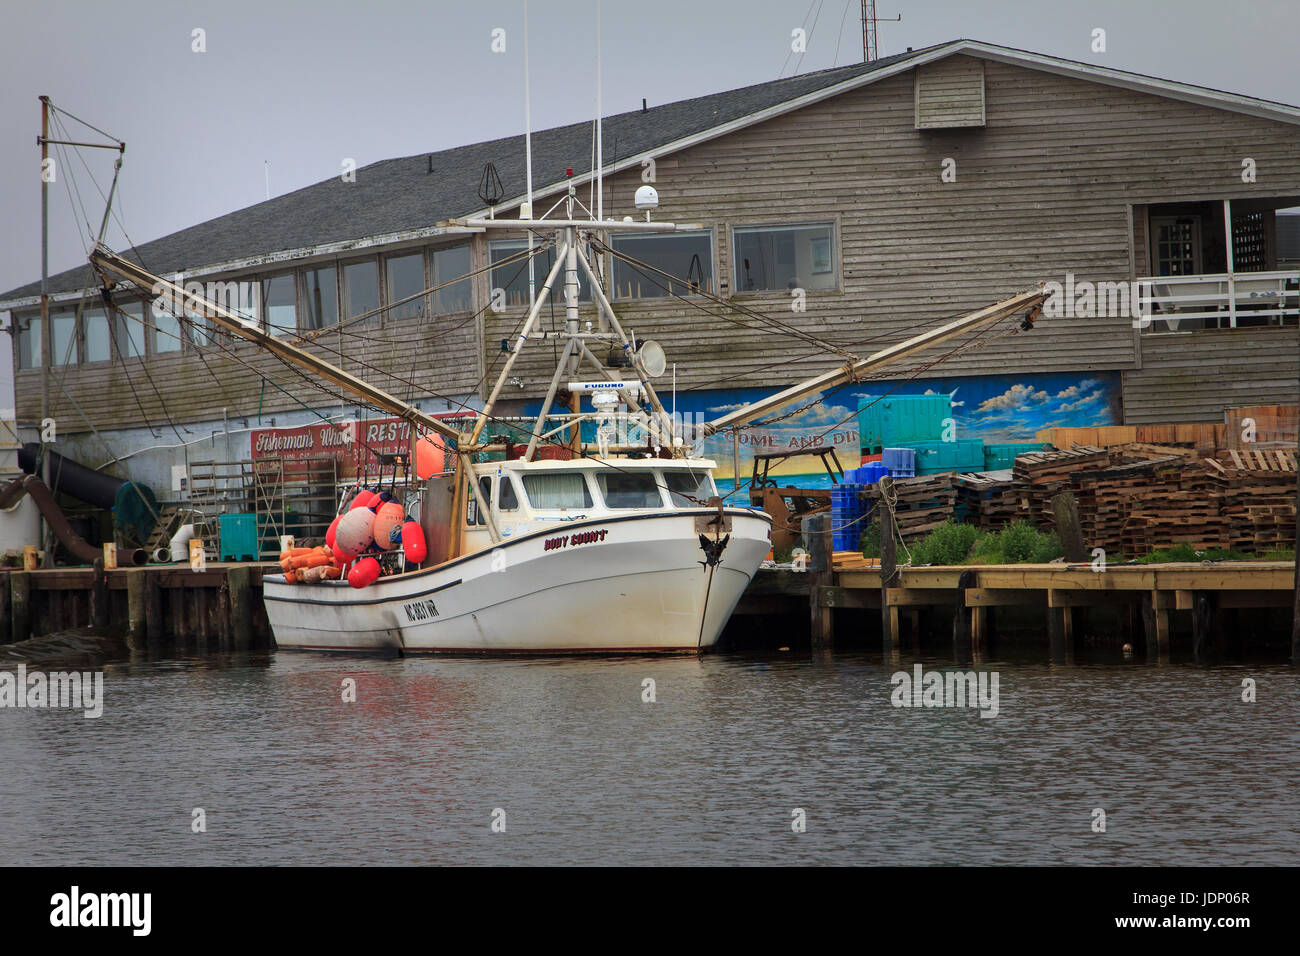 Commercial fishing boat in Wanchese Harbor Outer Banks North Carolina Stock  Photo - Alamy